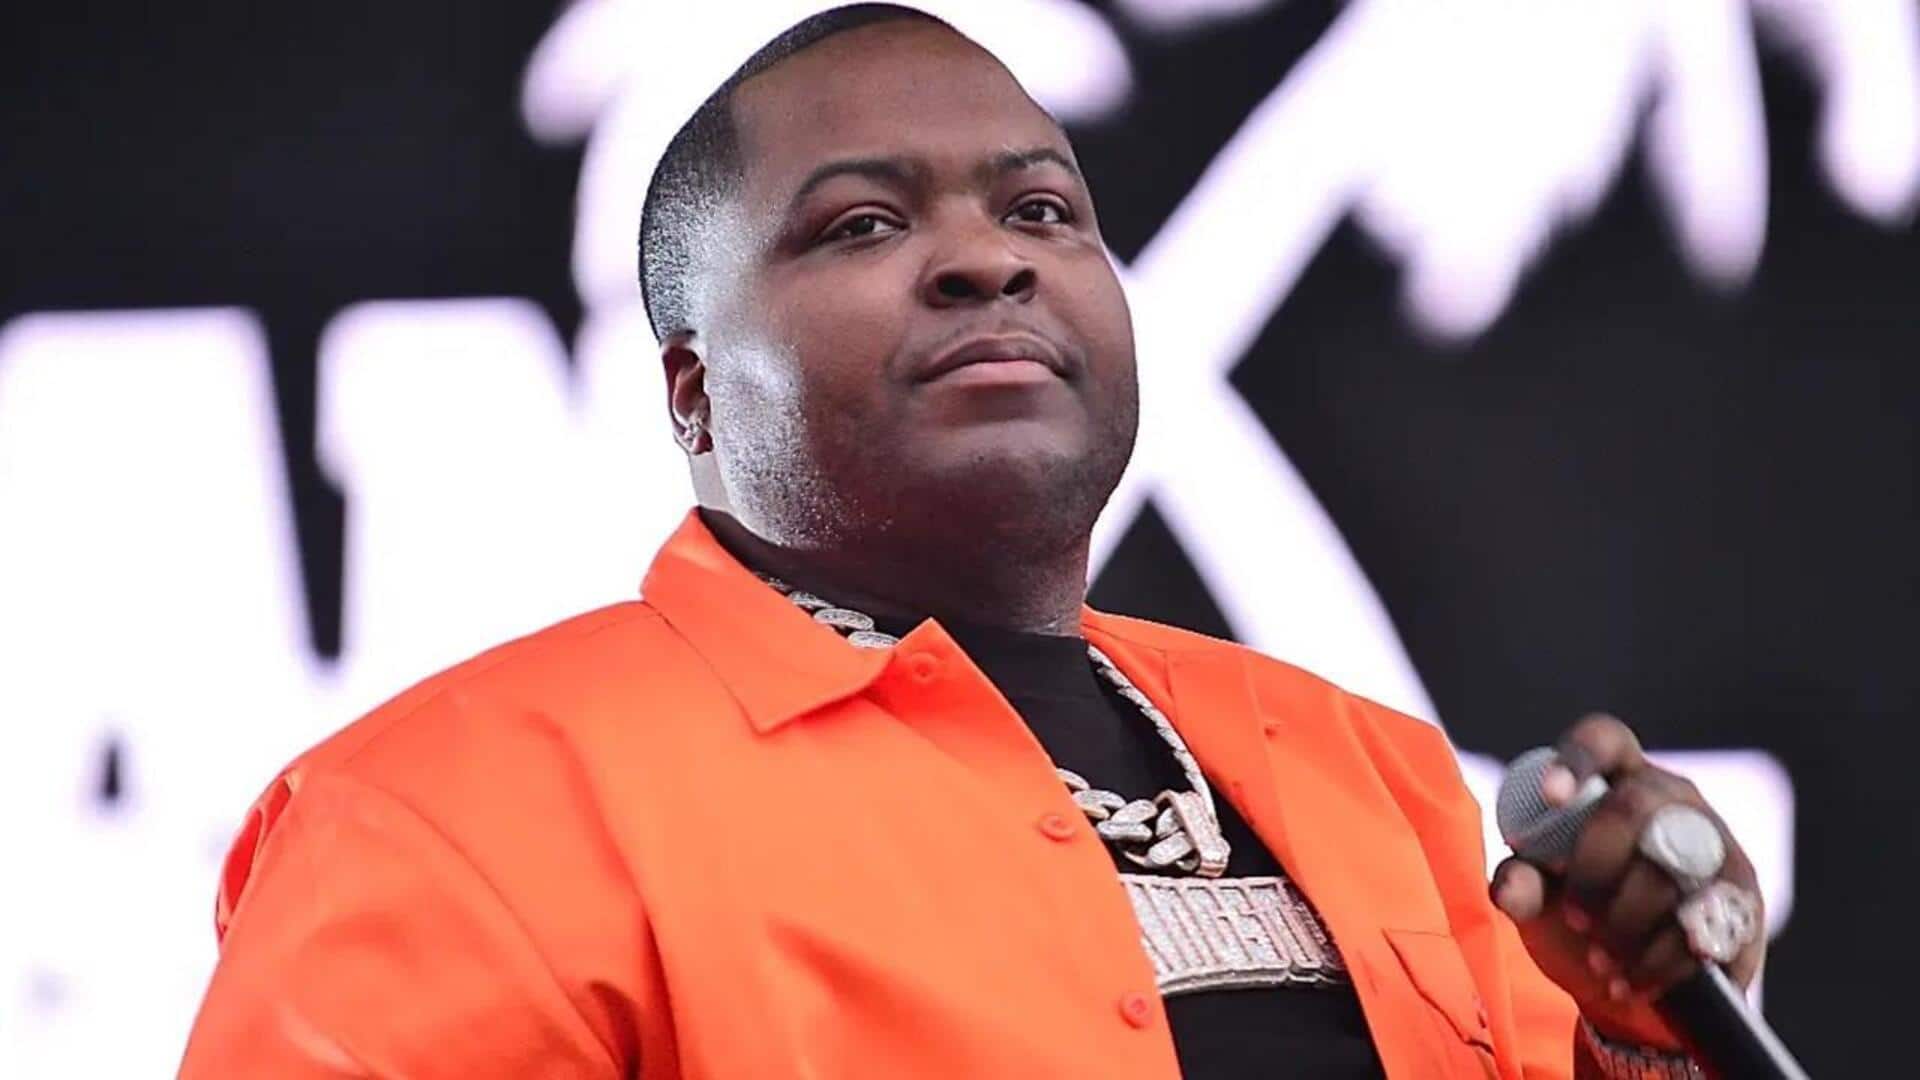 Rapper Sean Kingston arrested on fraud charges during concert